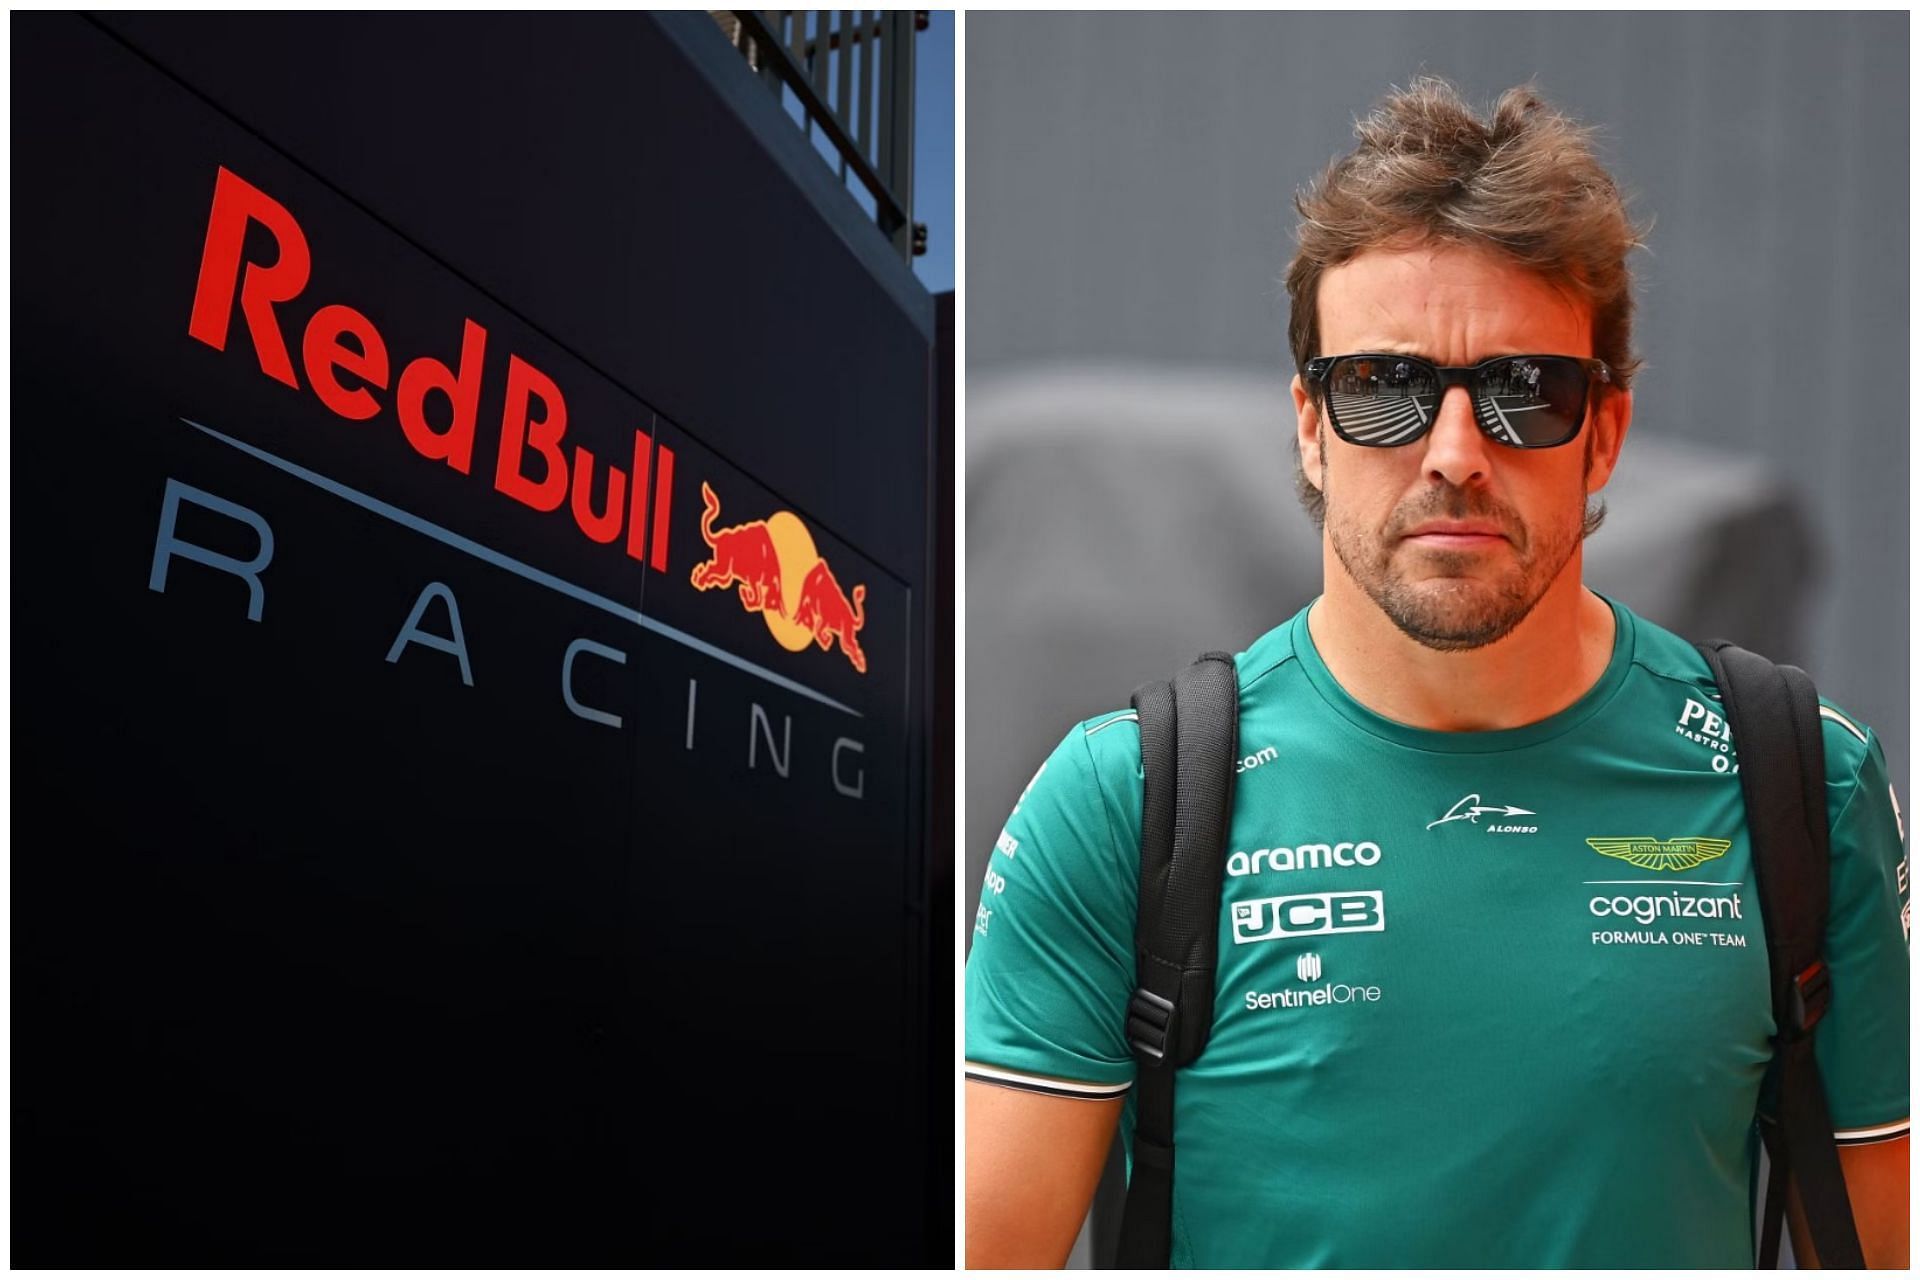 Fernando Alonso is not happy with rumours about him moving to Red Bull (Collage via Sportskeeda)